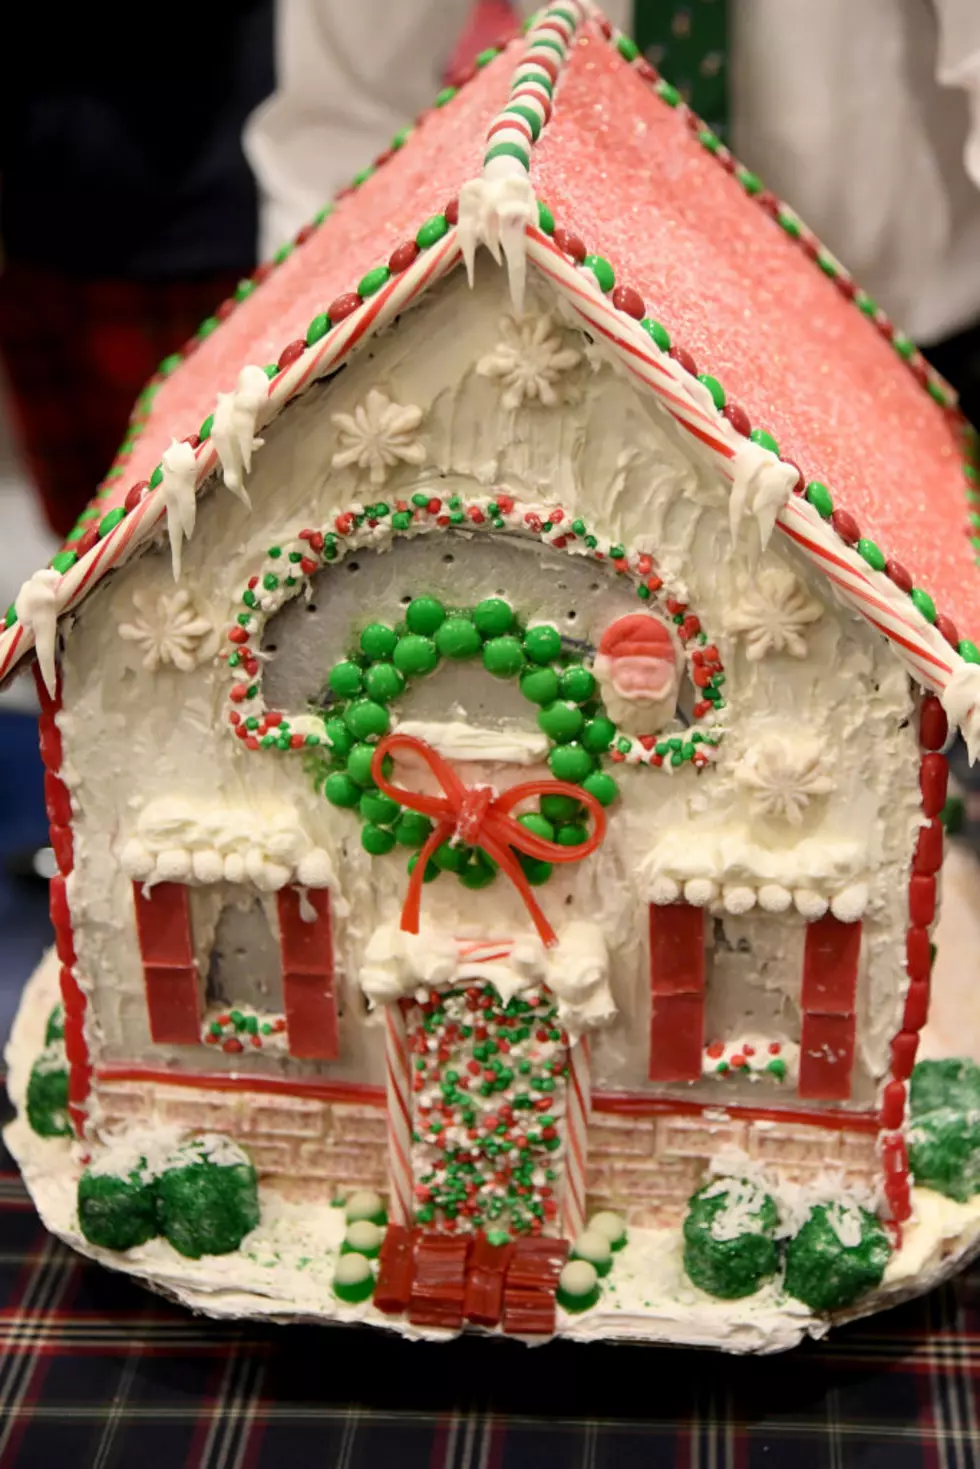 Finally a Gingerbread House That I Will Build and Eat